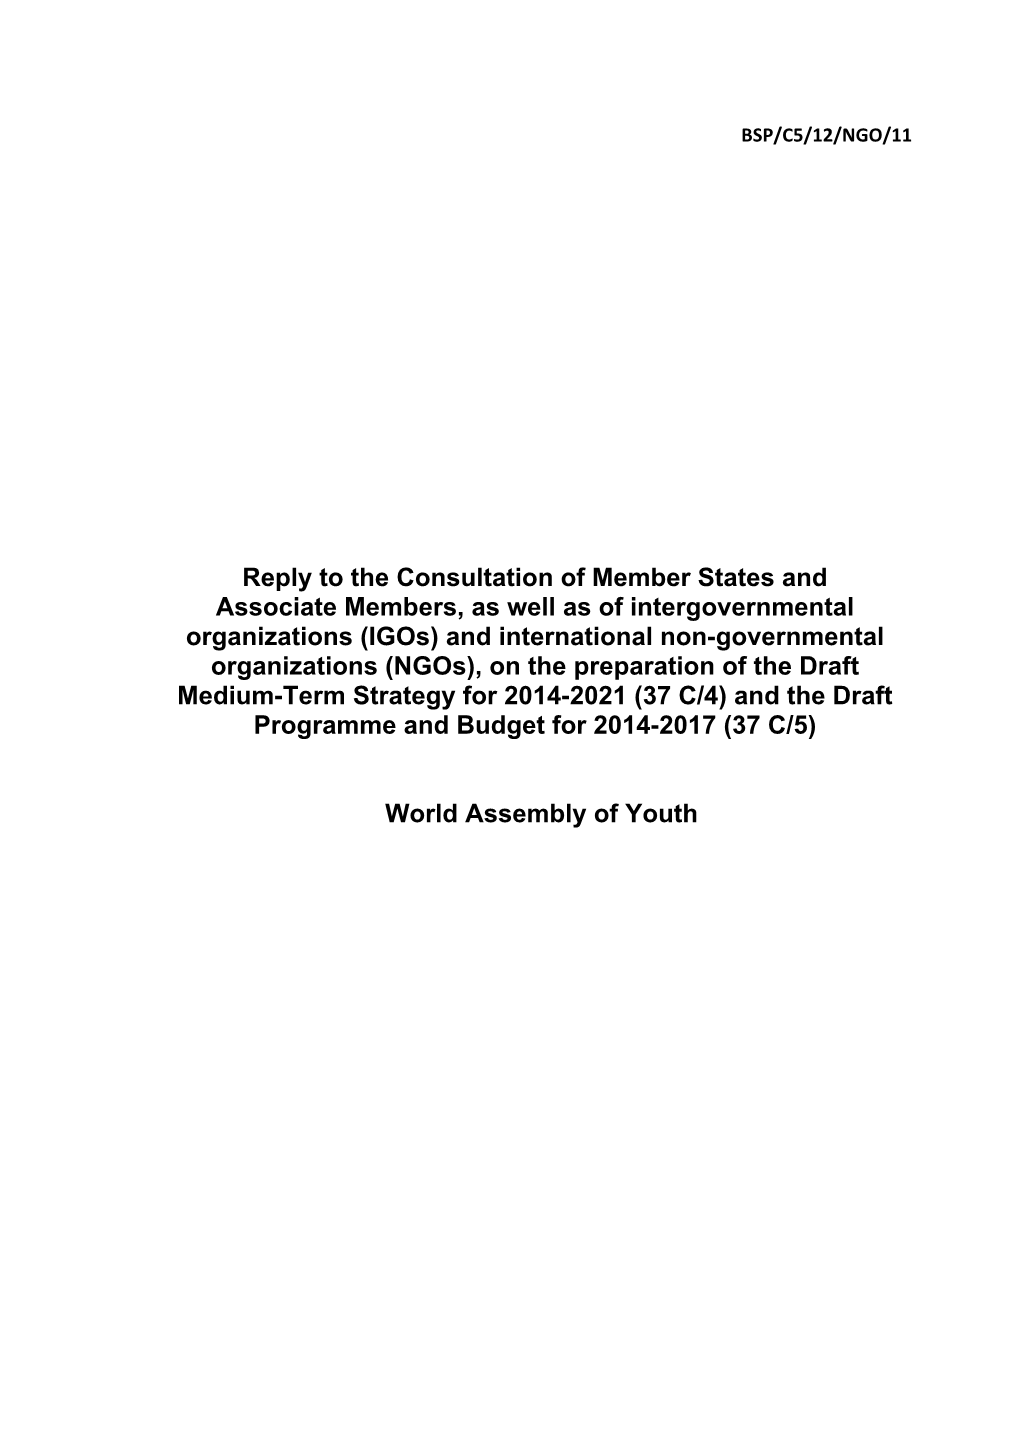 Reply to the Consultation of Member States and Associate